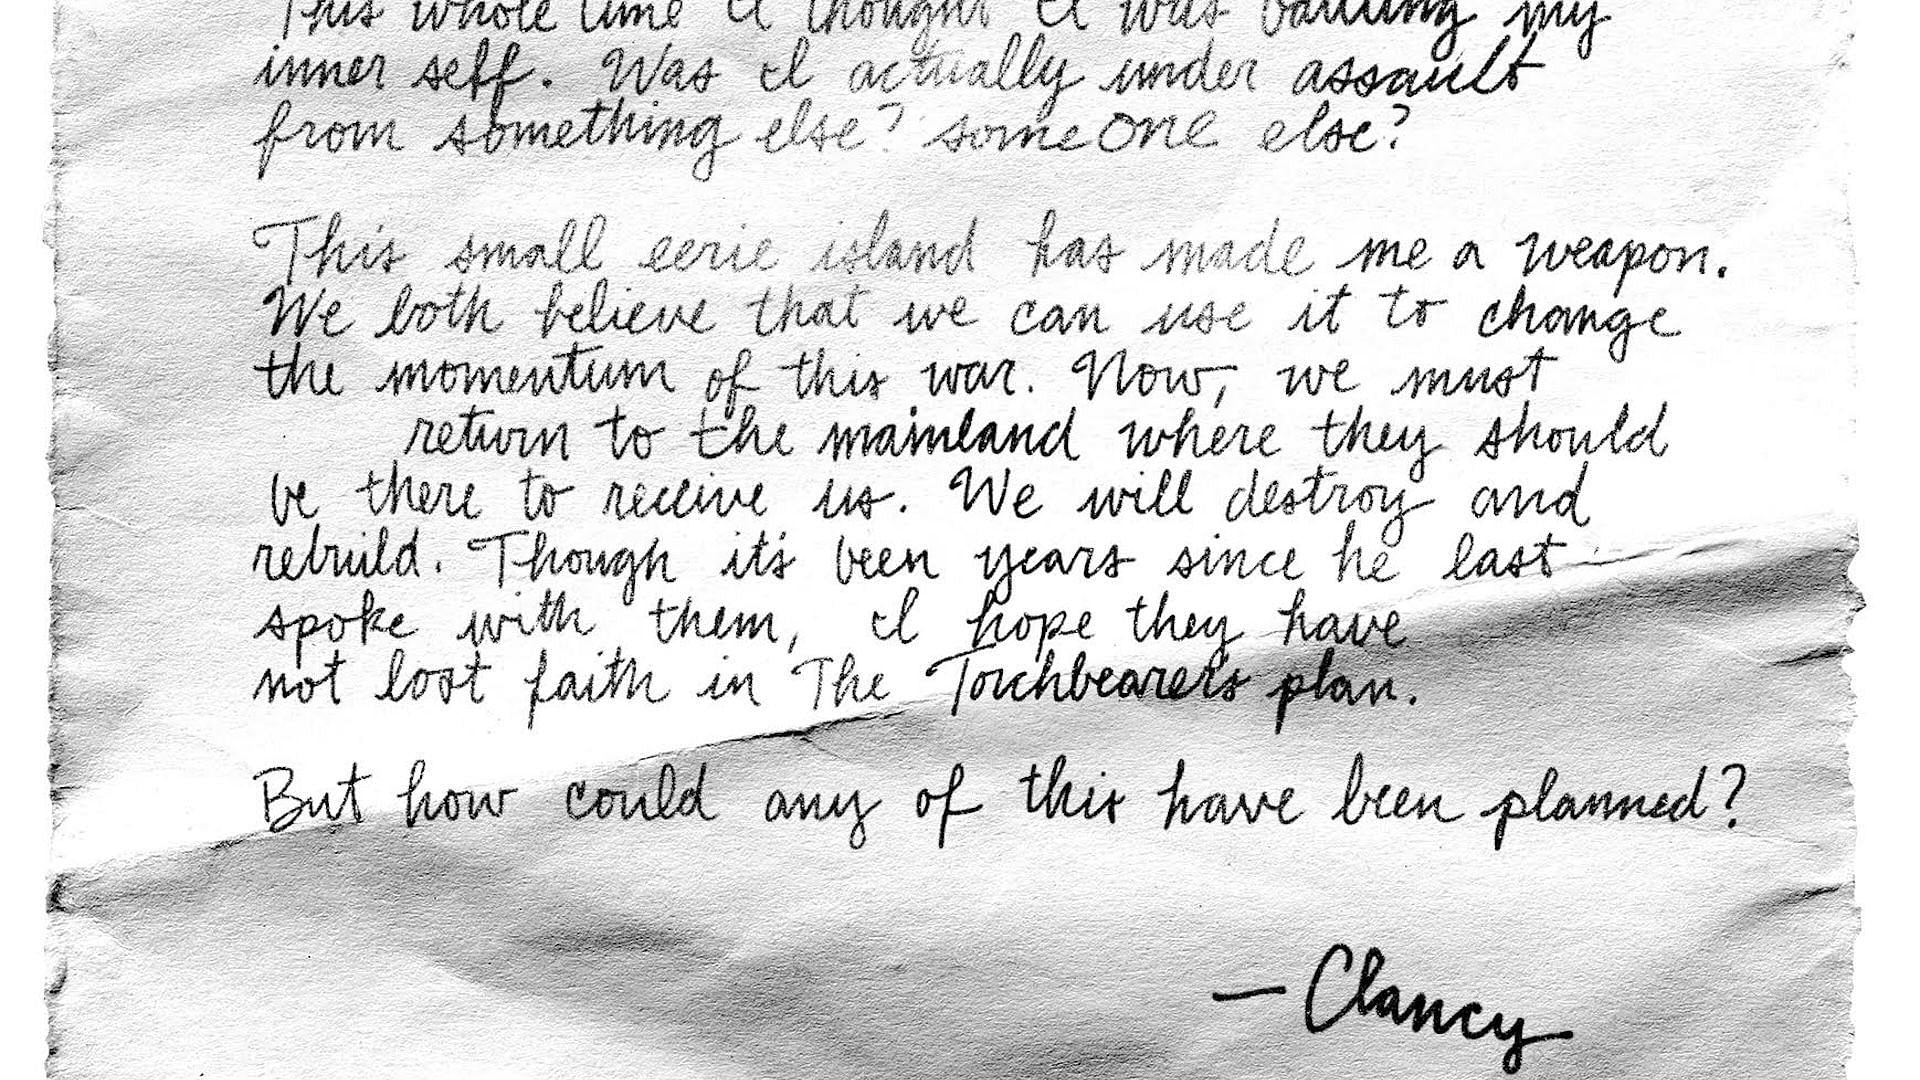 &#039;Letter 9&#039; from Clancy&#039;s Journal taken from Twenty One Pilots&#039; official website for &#039;I Am Clancy&#039; (Image via dmaorg.info)